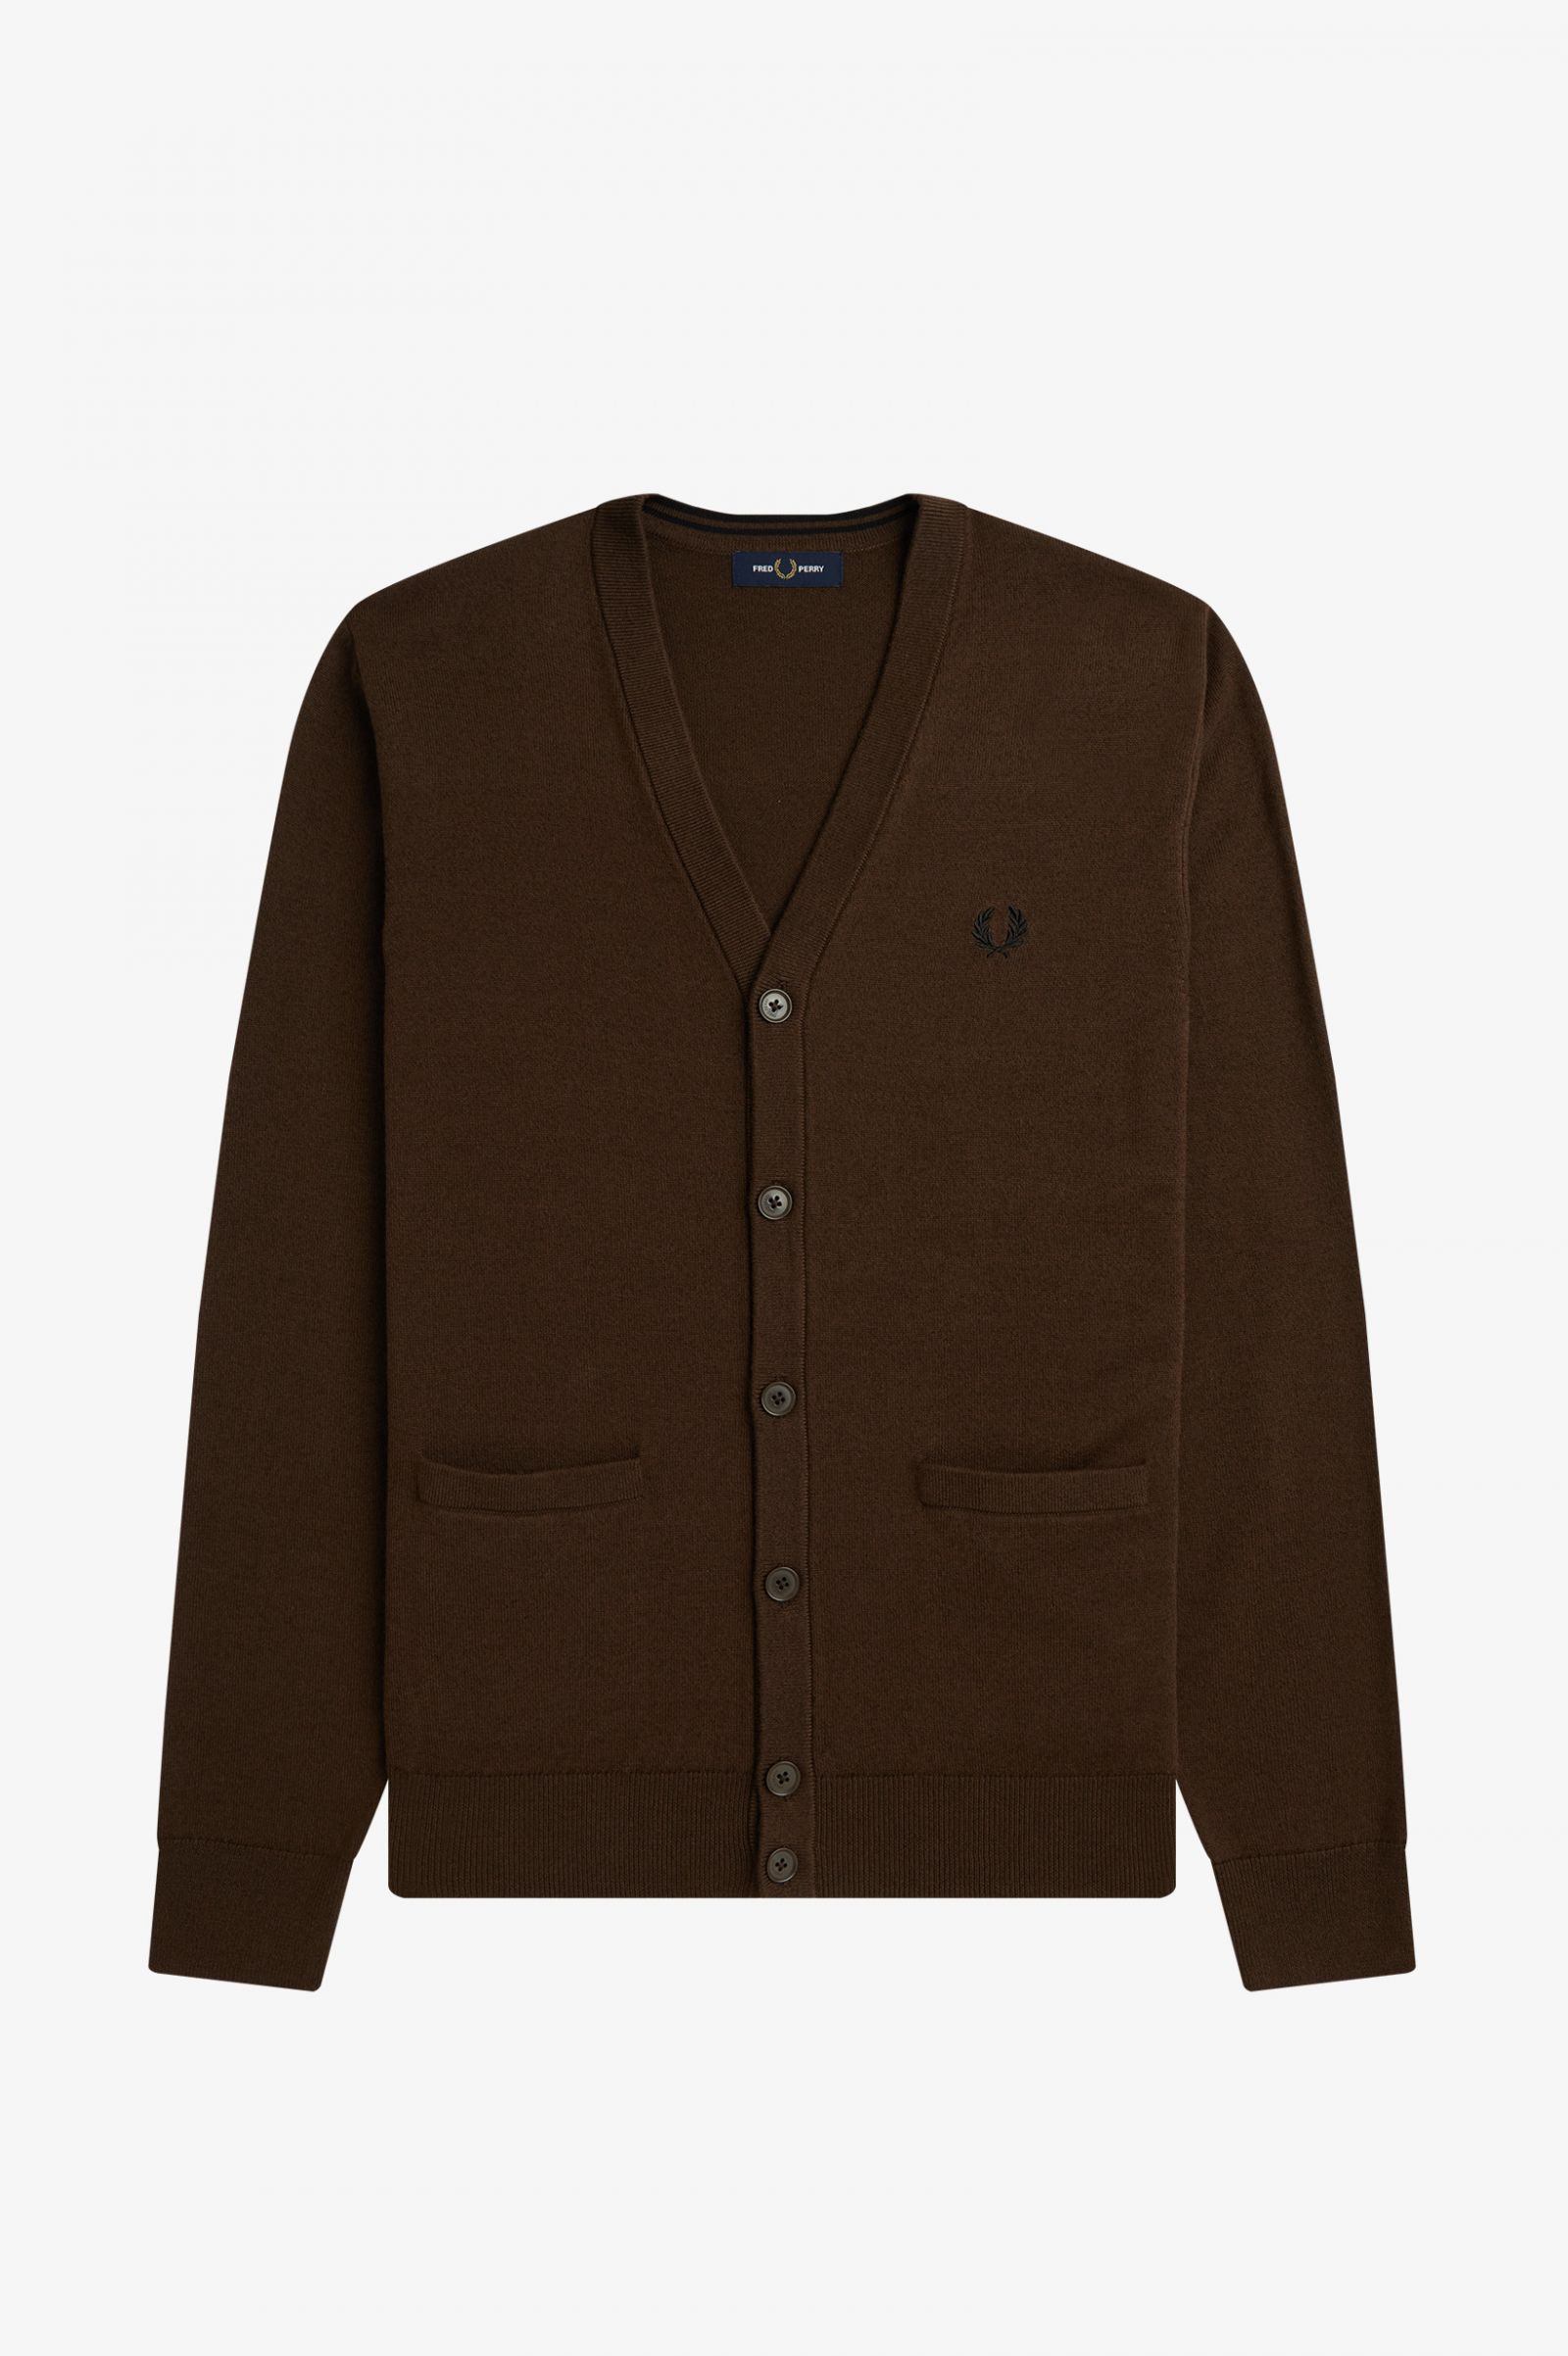 Fred Perry Classic Cardigan in Burnt Tobacco 